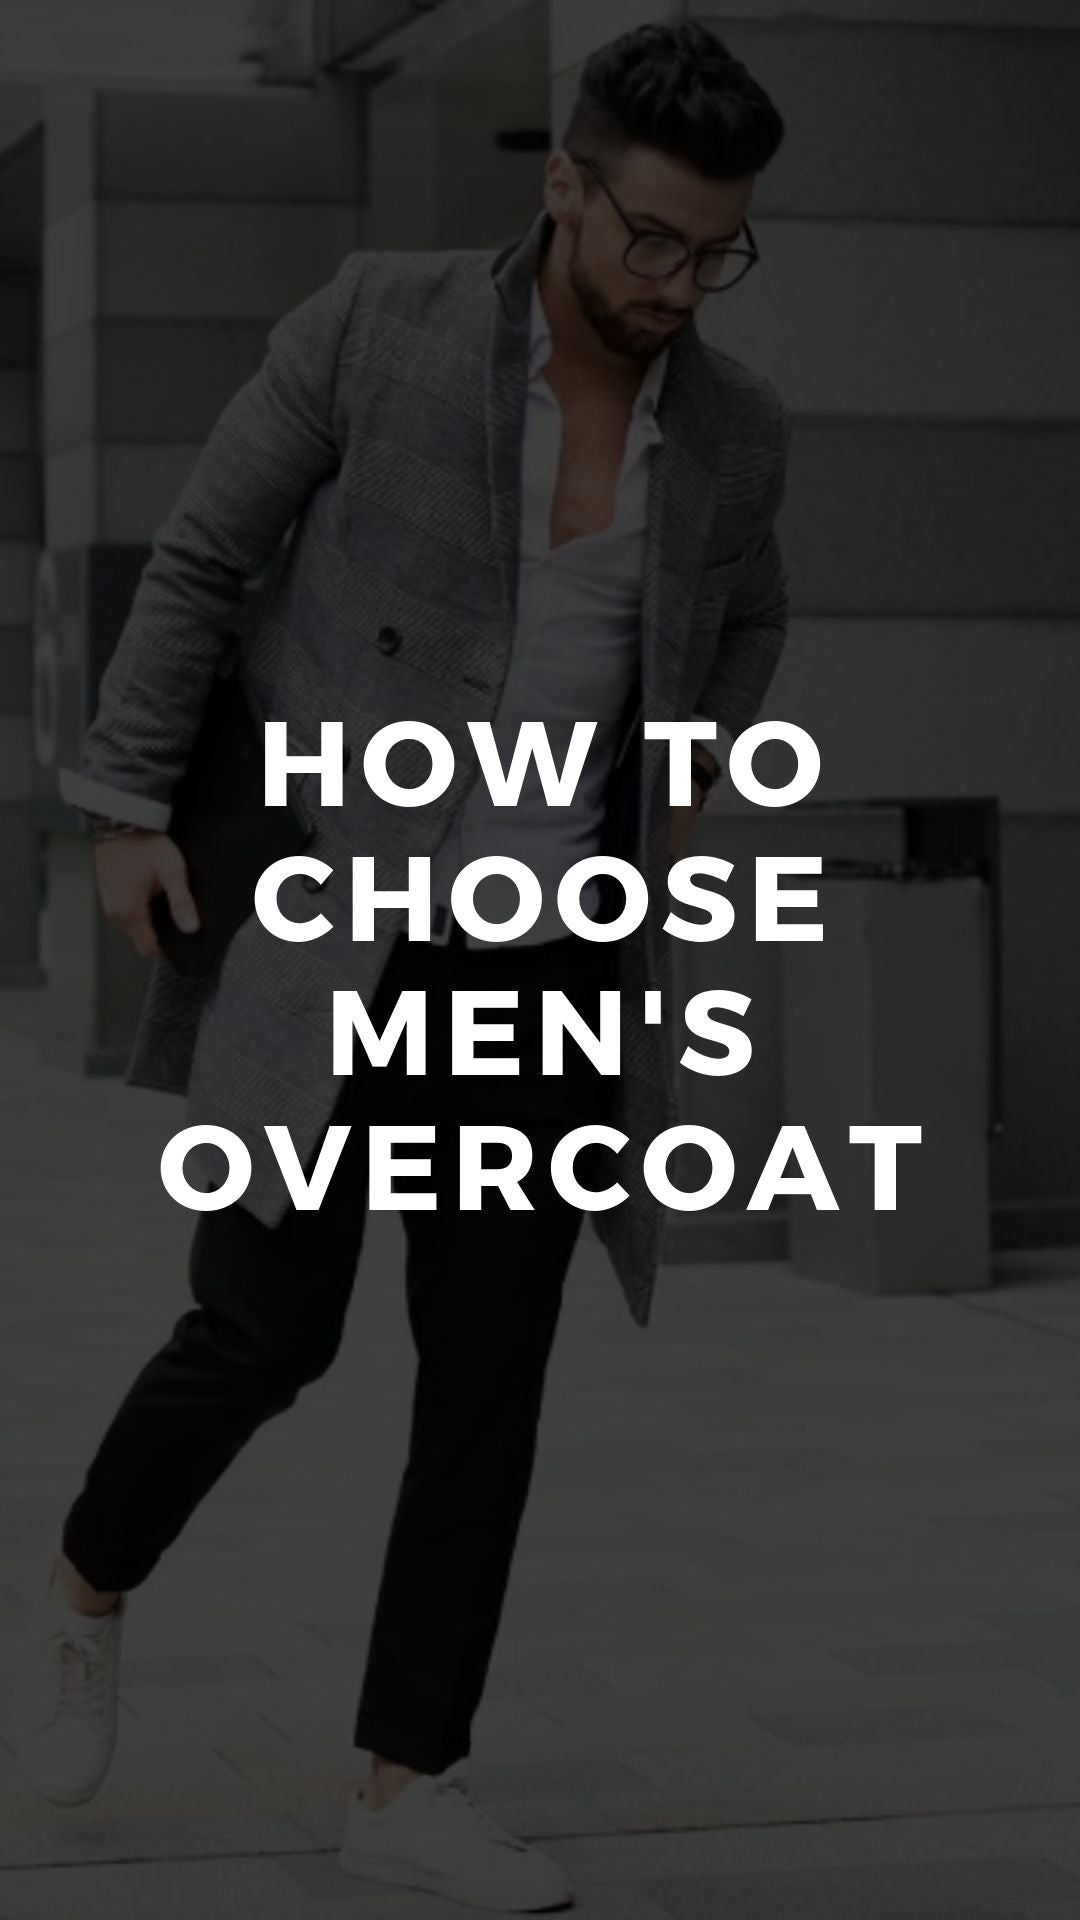 How to Choose Men's Overcoat - LIFESTYLE BY PS